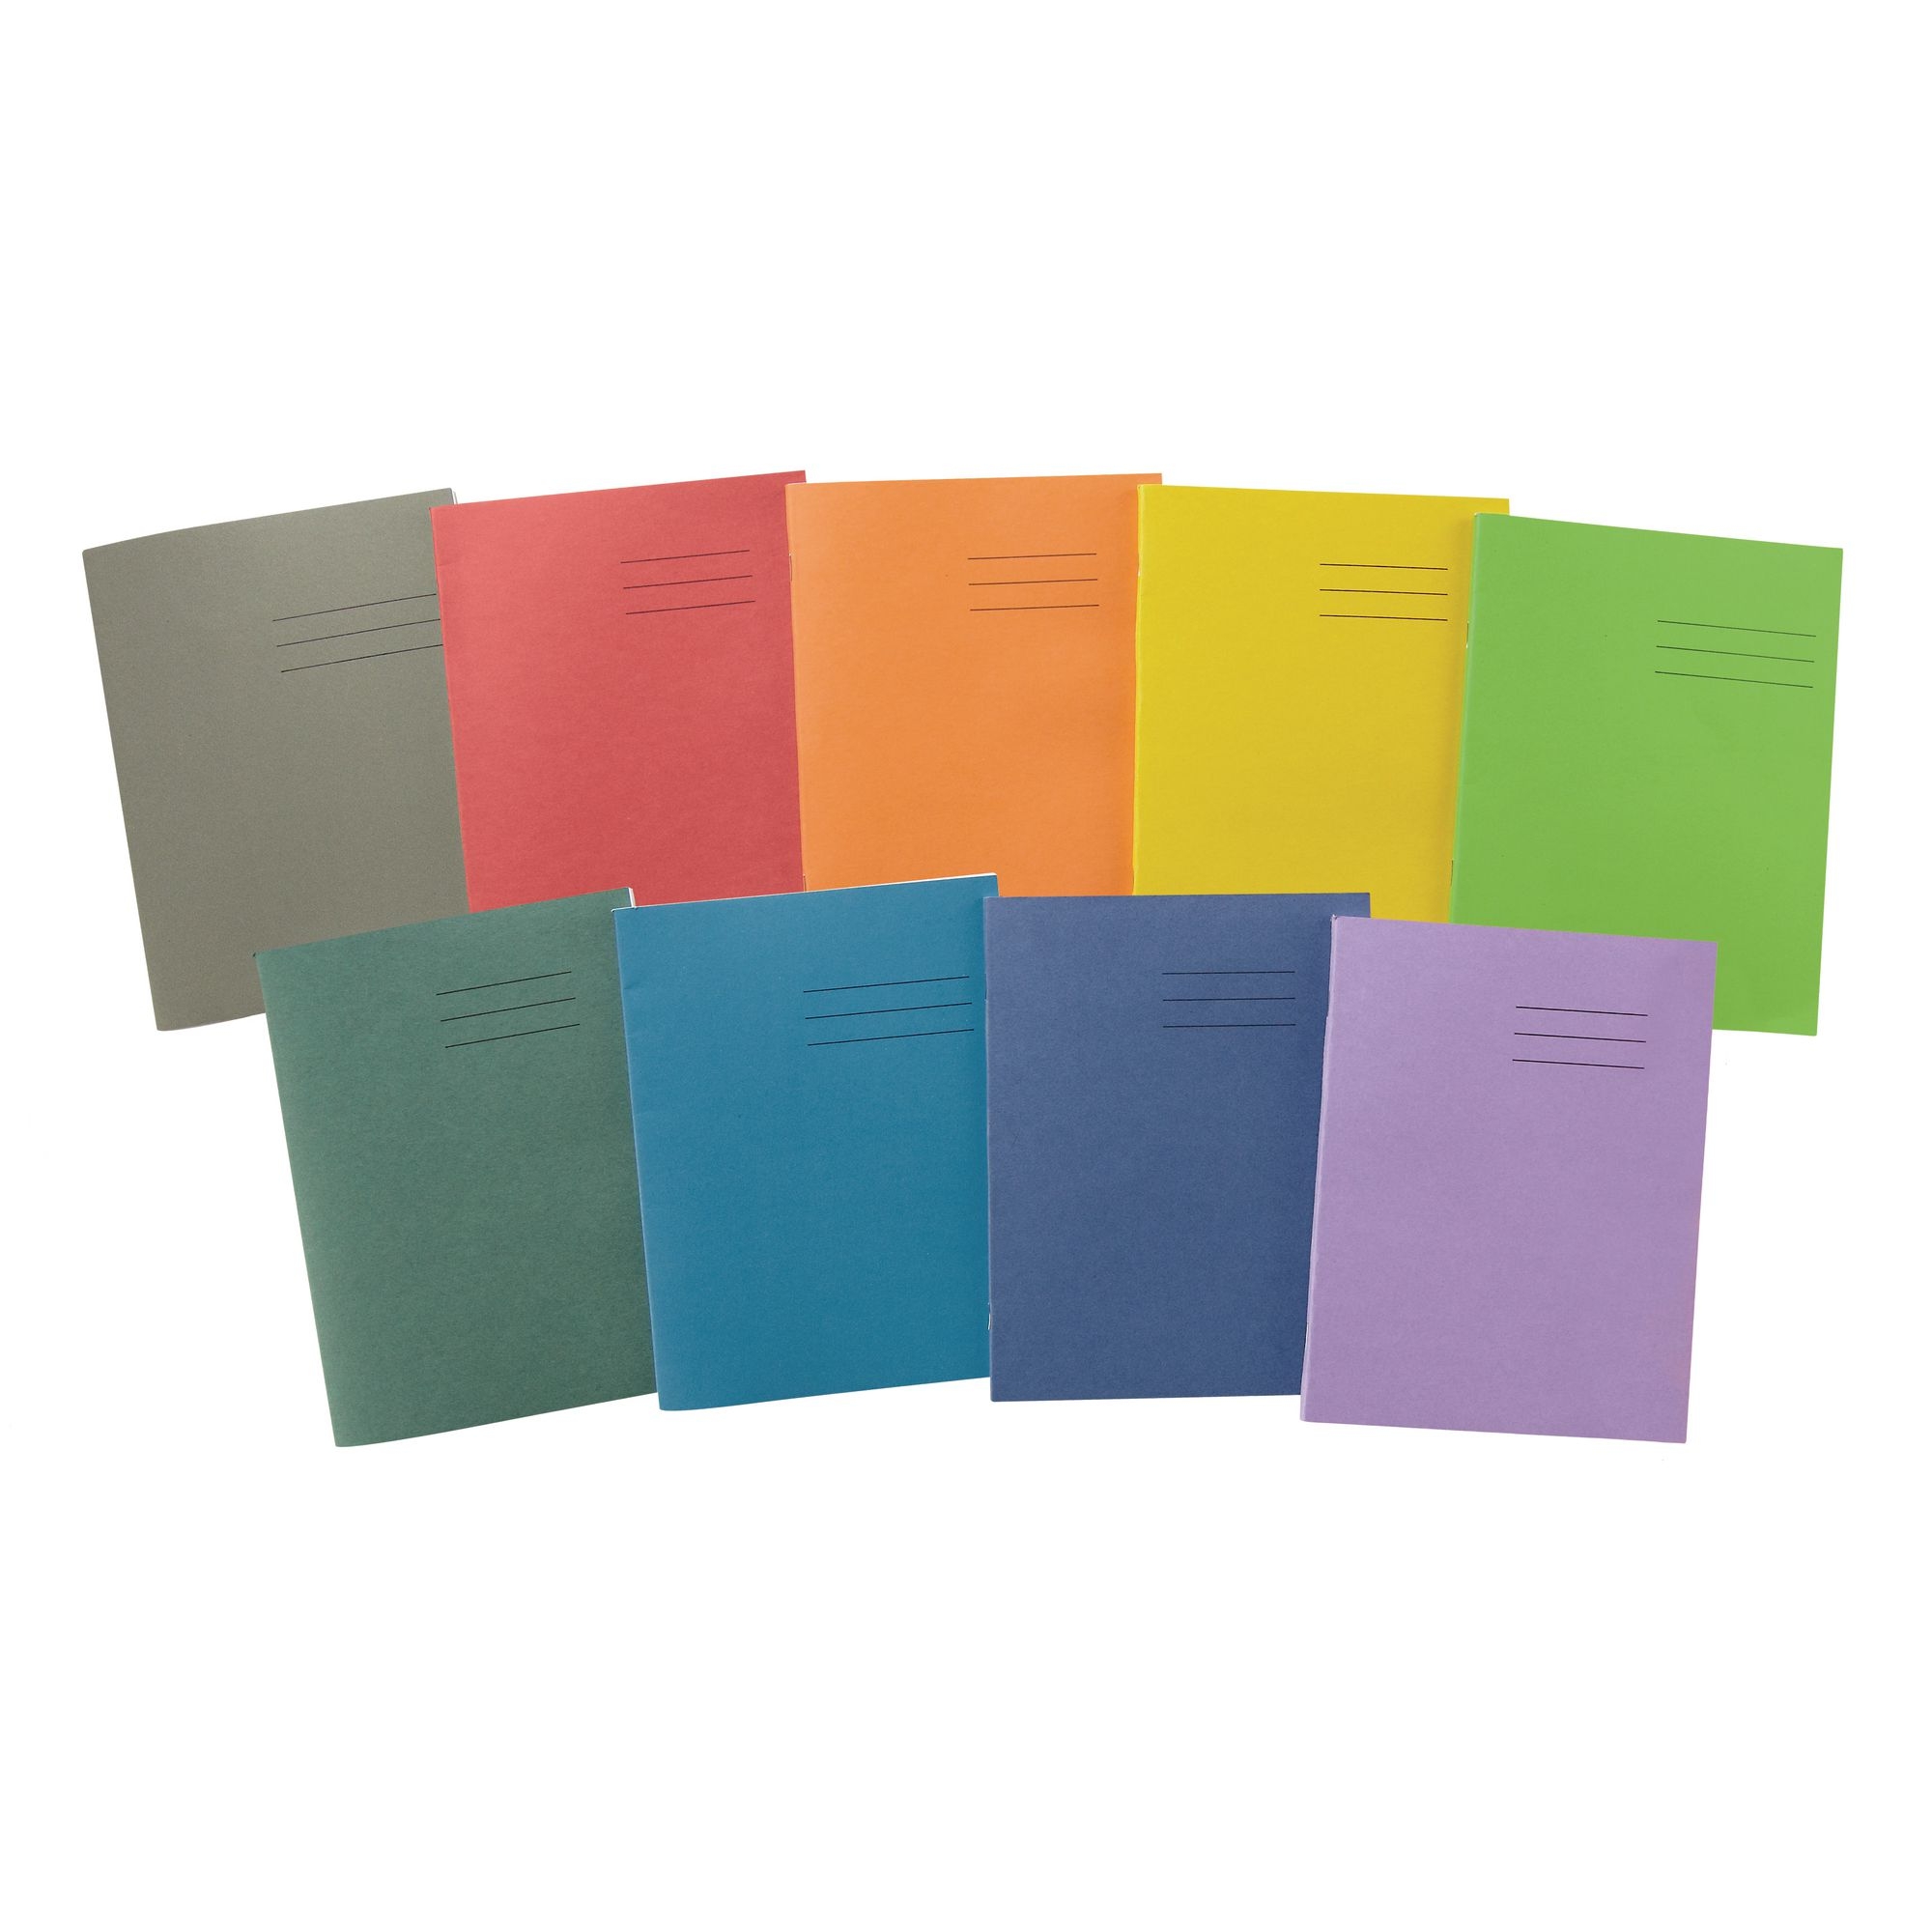 Pink 9x7" Exercise Book 80-Page, Plain - Pack of 100